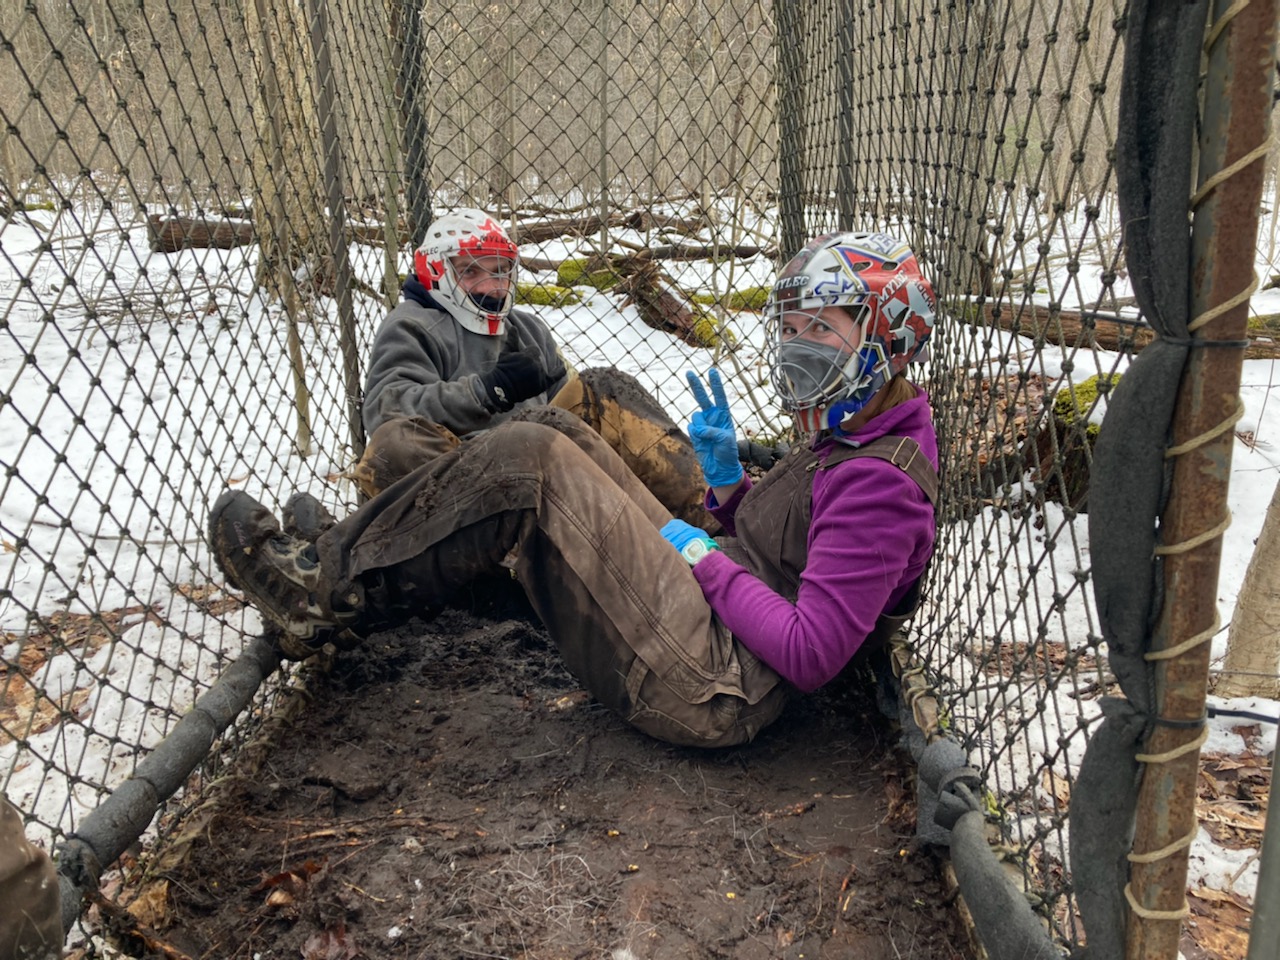 2 people sitting in Clover trap in the mud